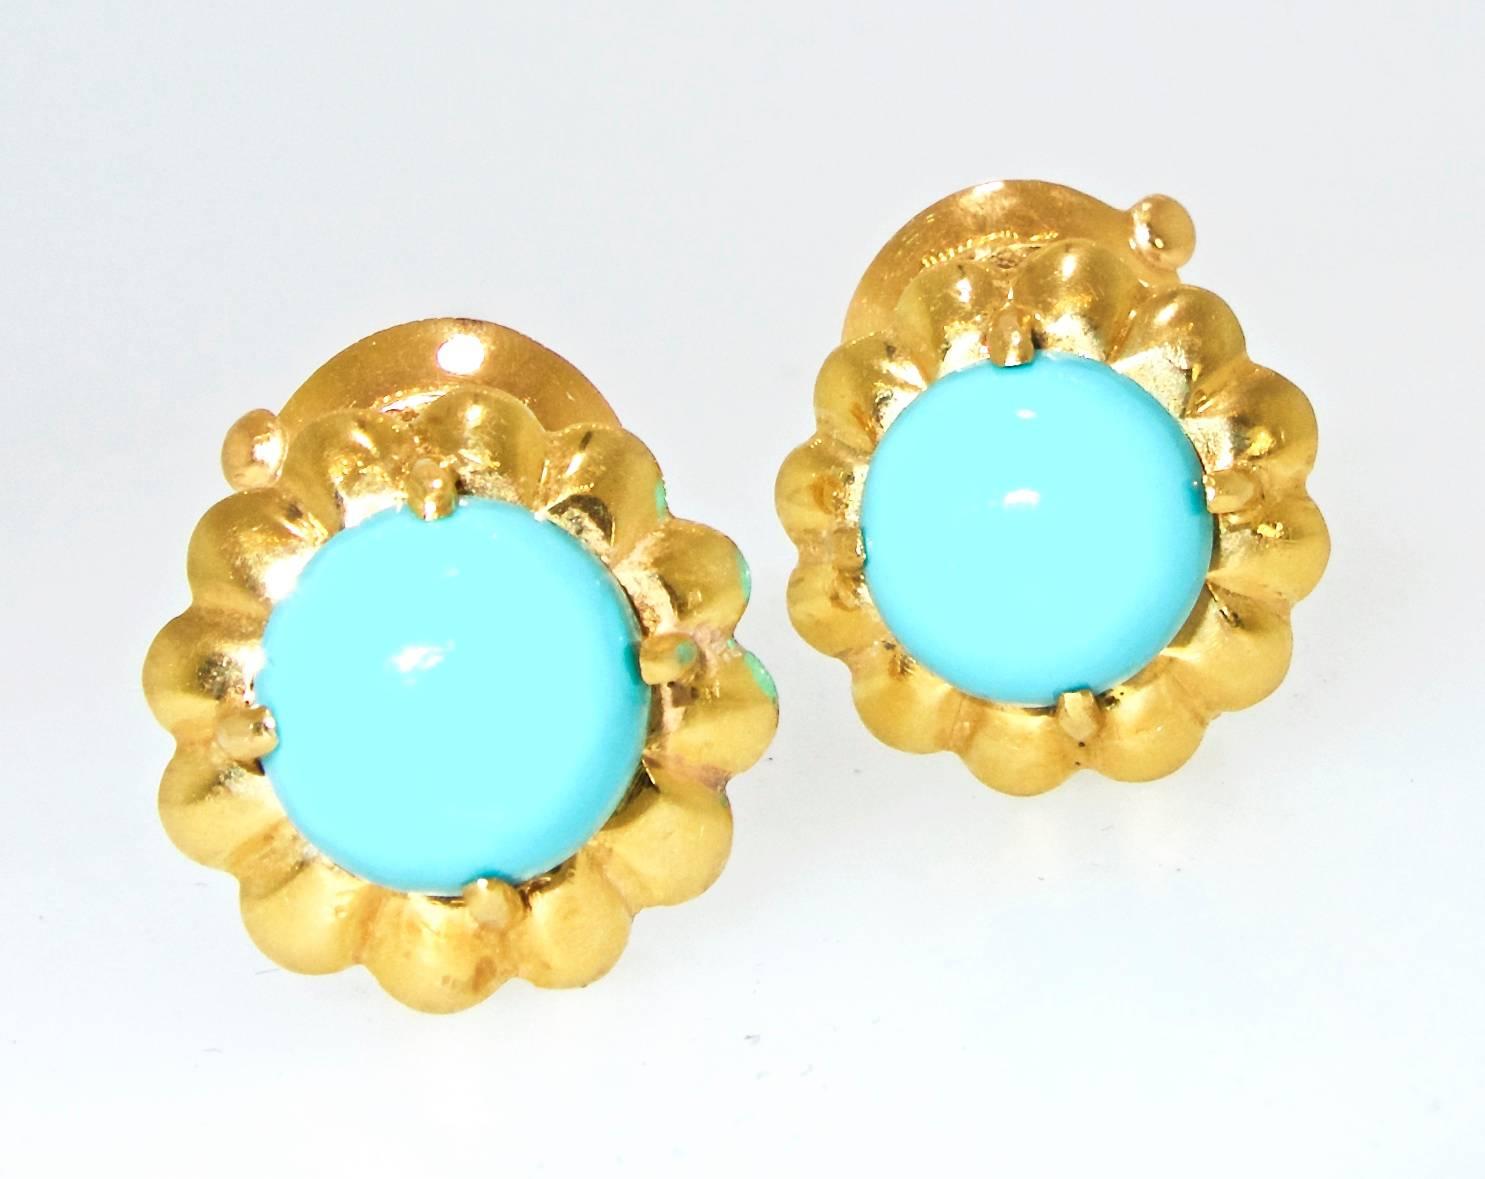 18K fine earrings centering 10.5 mm. bright turquoise, these earrings are signed, numbered and hallmarked.  They are for either a pierced or a non pierced ear.  These earrings are .75 inches in diameter, circa 1960